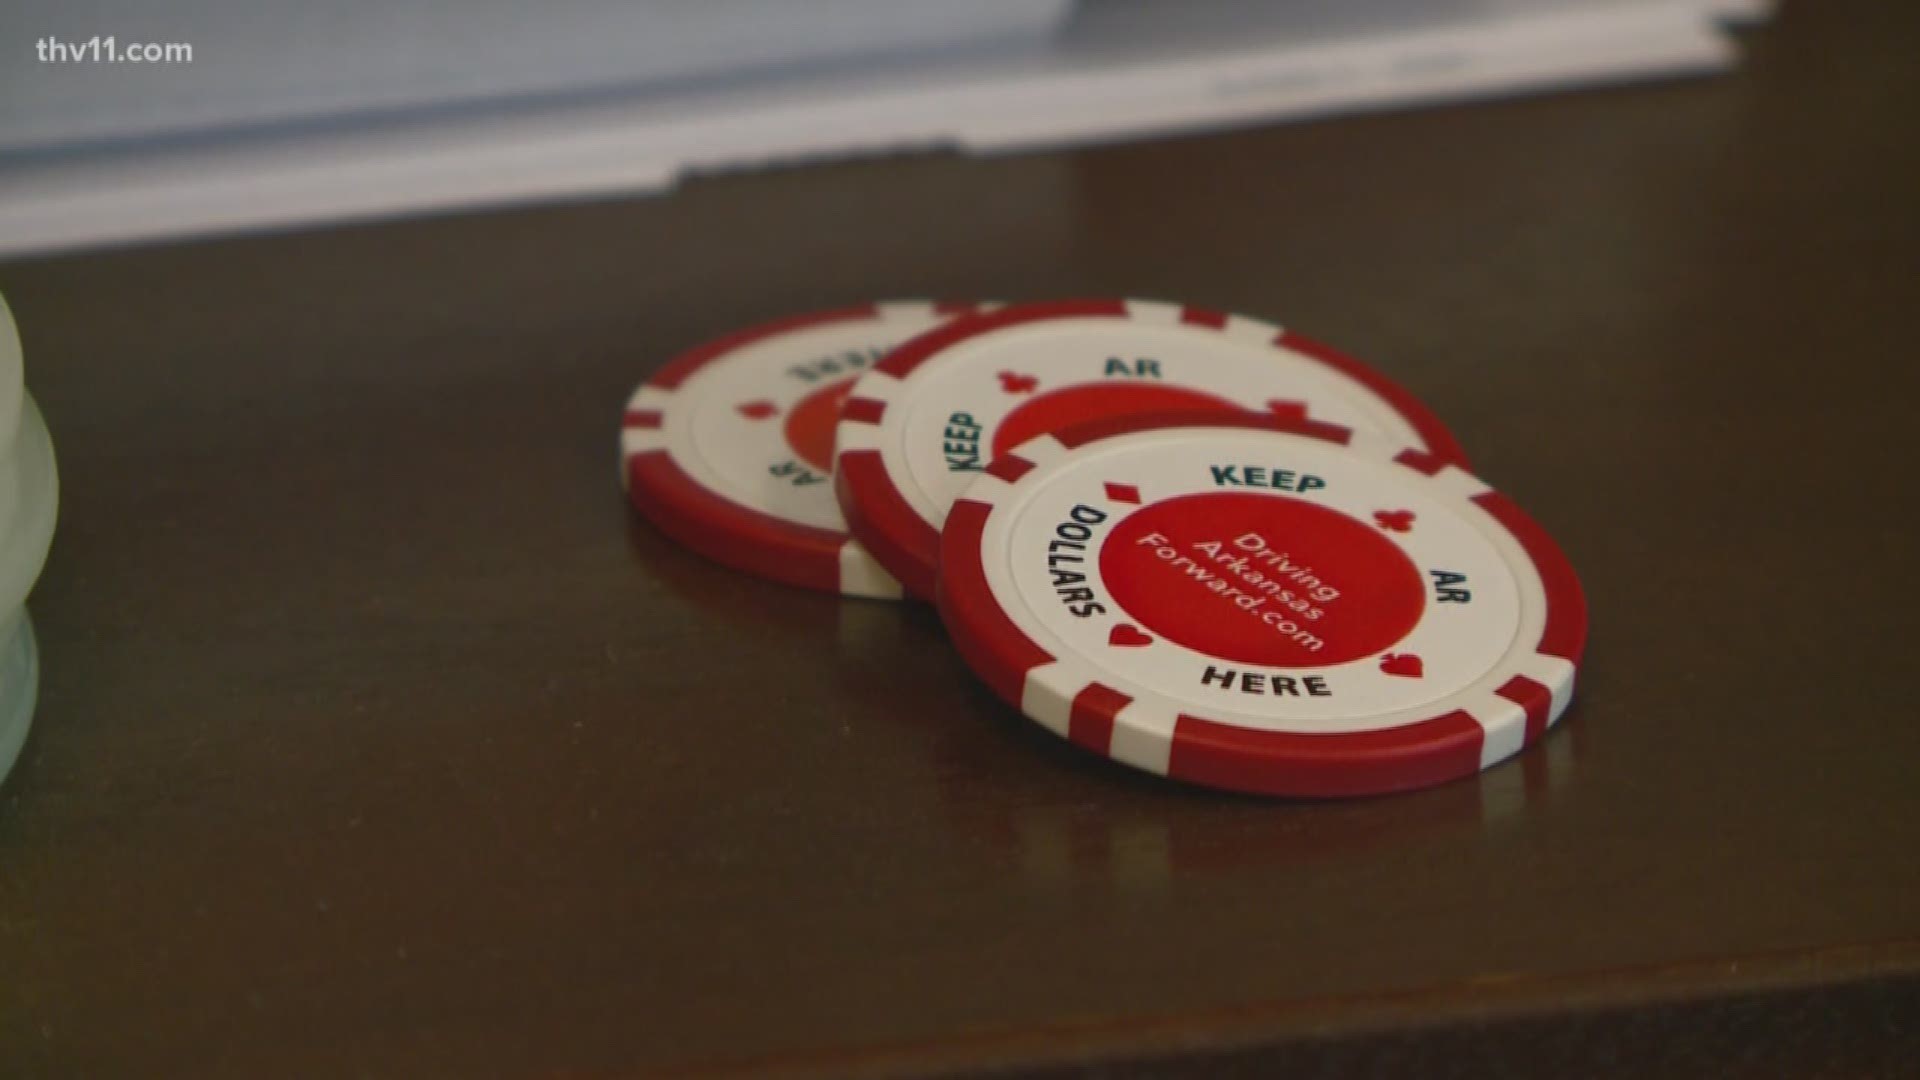 The rules on casinos in Arkansas could officially be in place as early as next week.